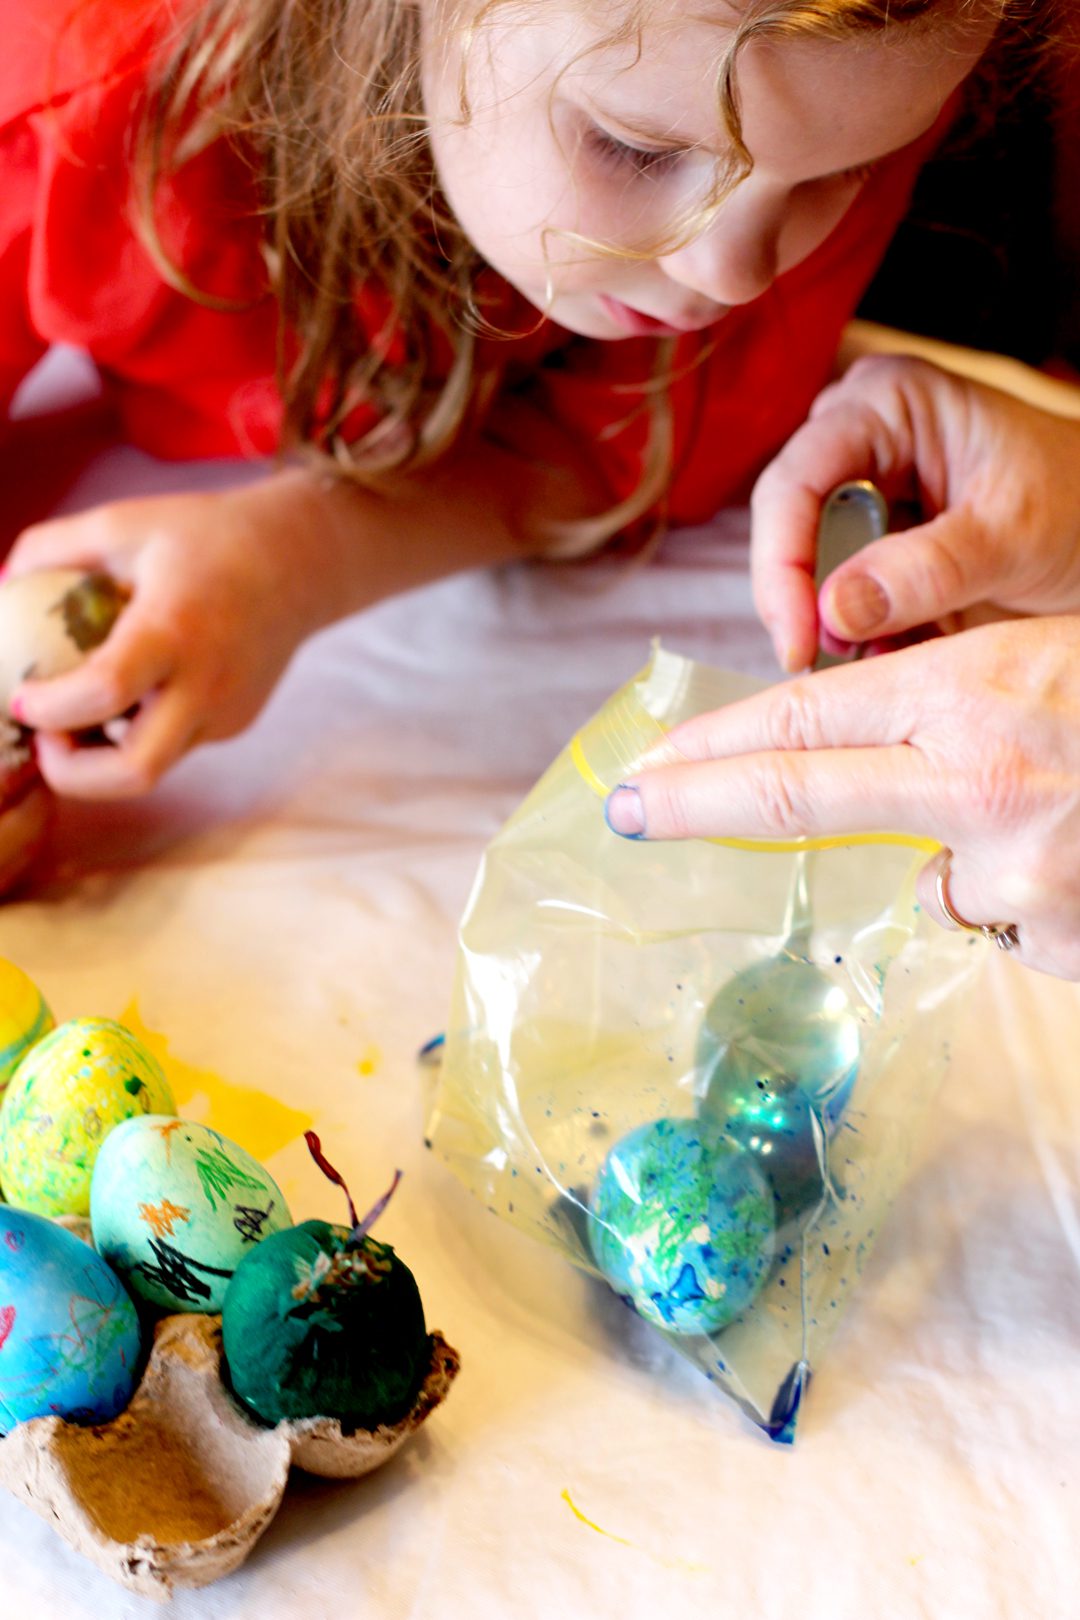 A child watching an easter egg being dyed in a bag.